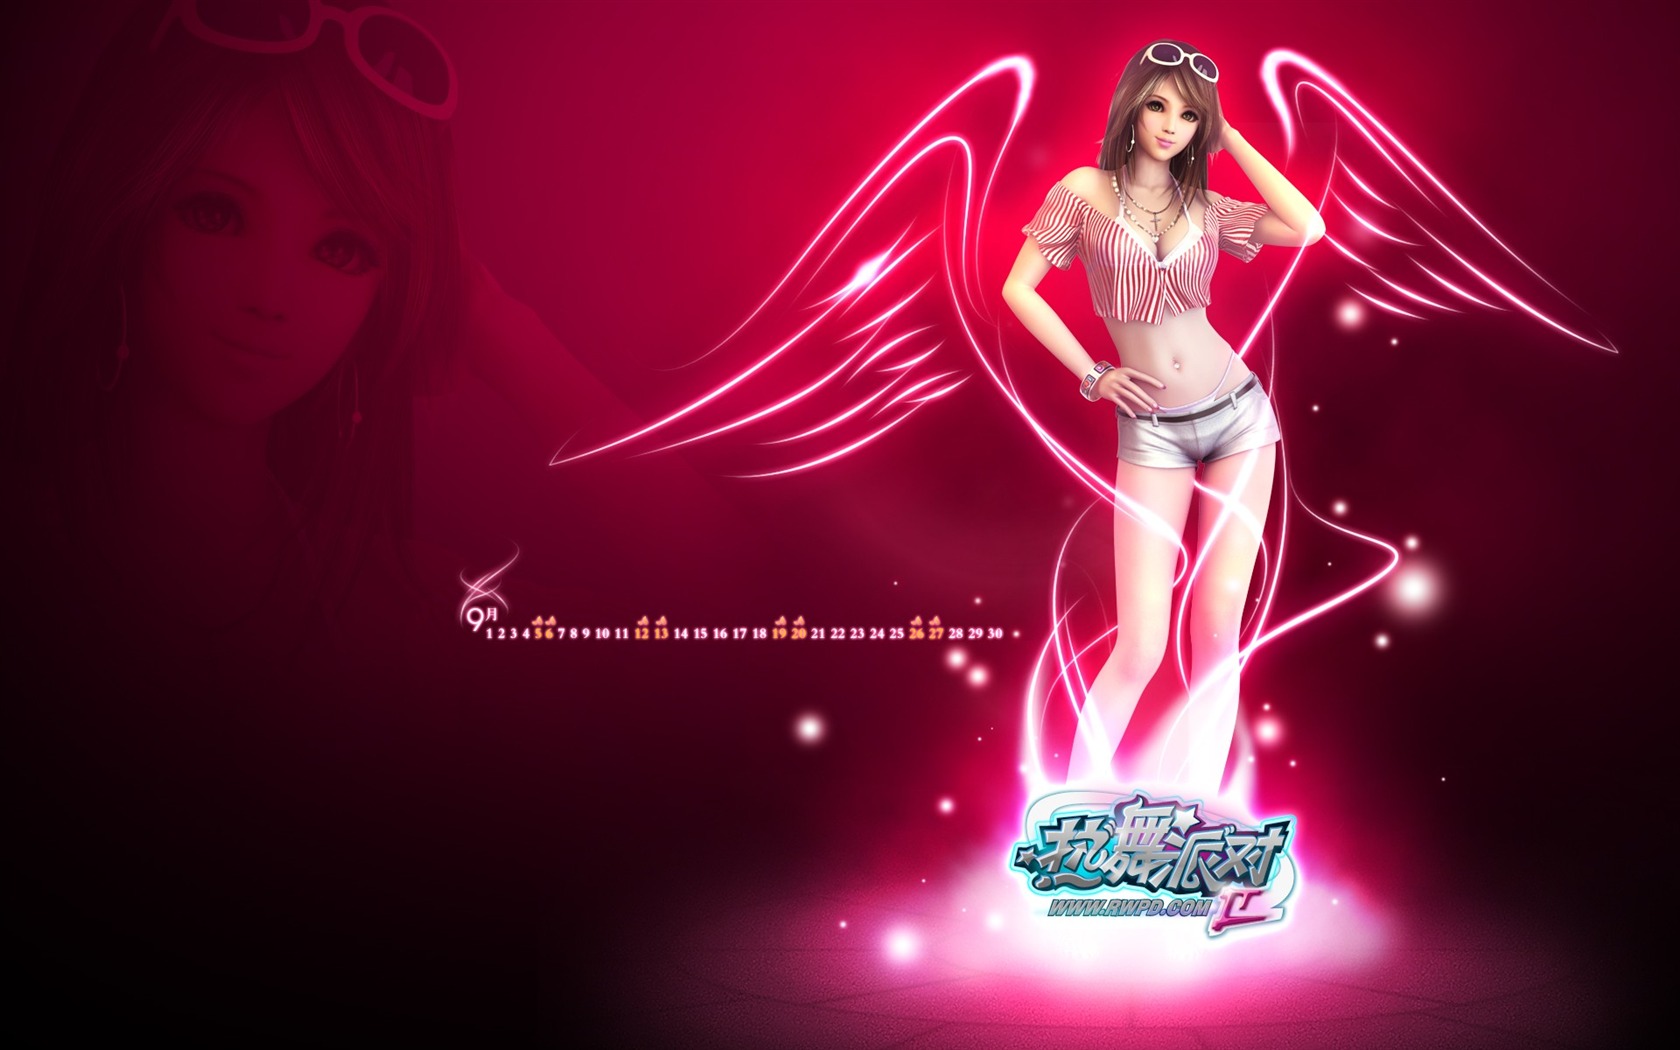 Online game Hot Dance Party II official wallpapers #2 - 1680x1050